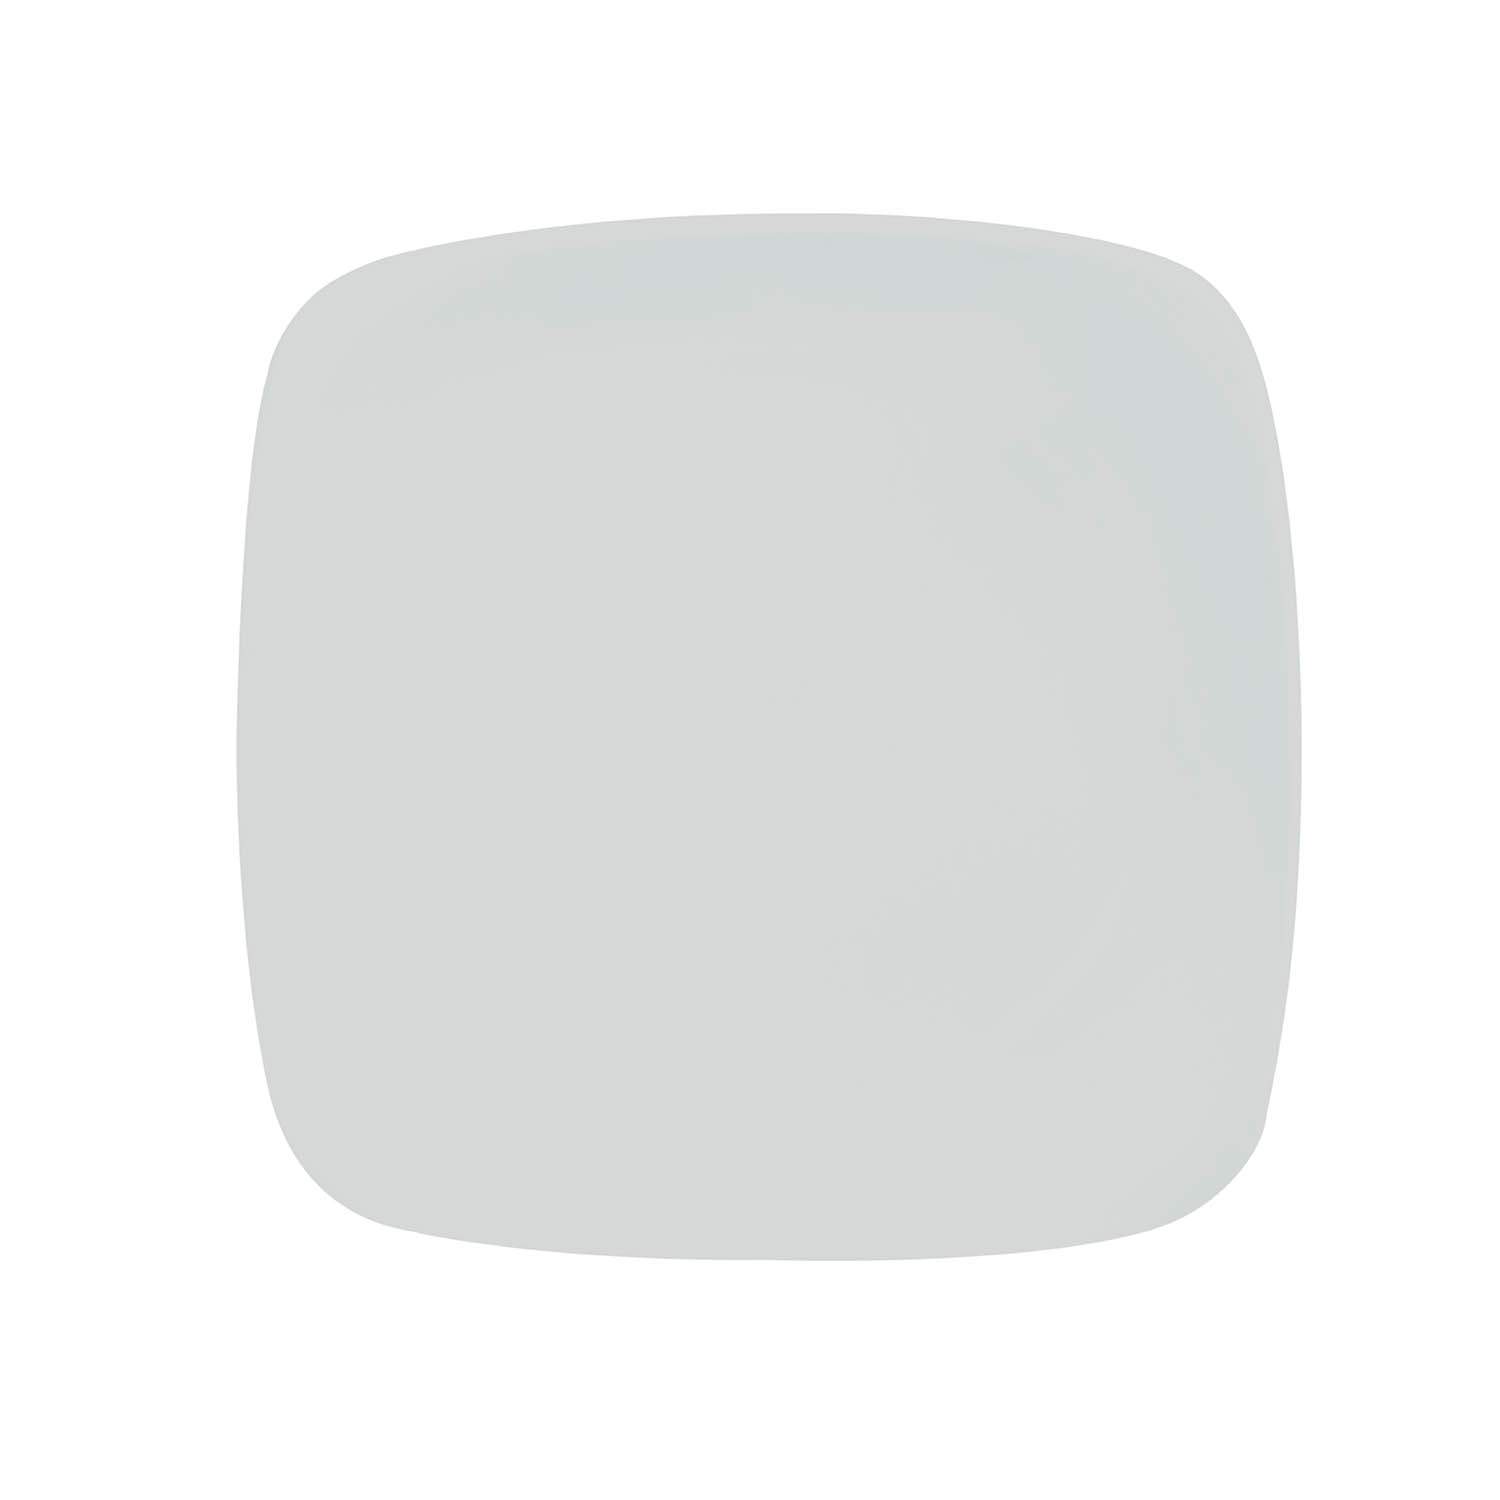 Baralee Simple Plus Square Plate